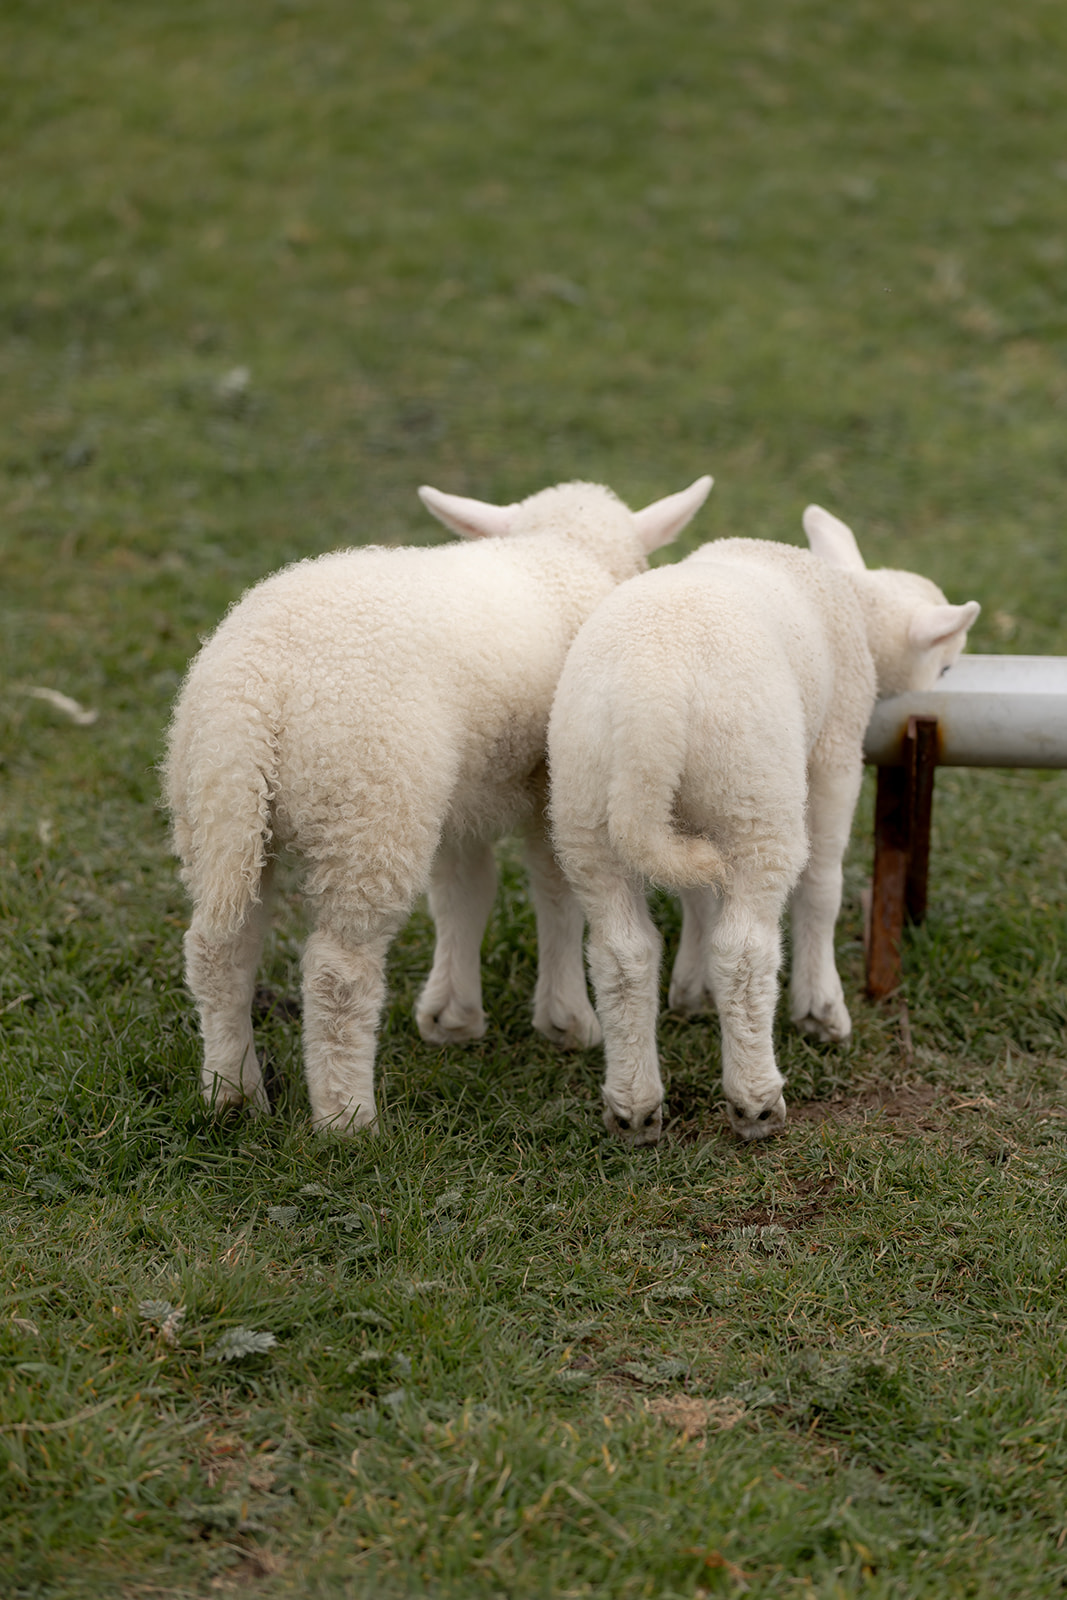 Lambs standing next to each other and drinking